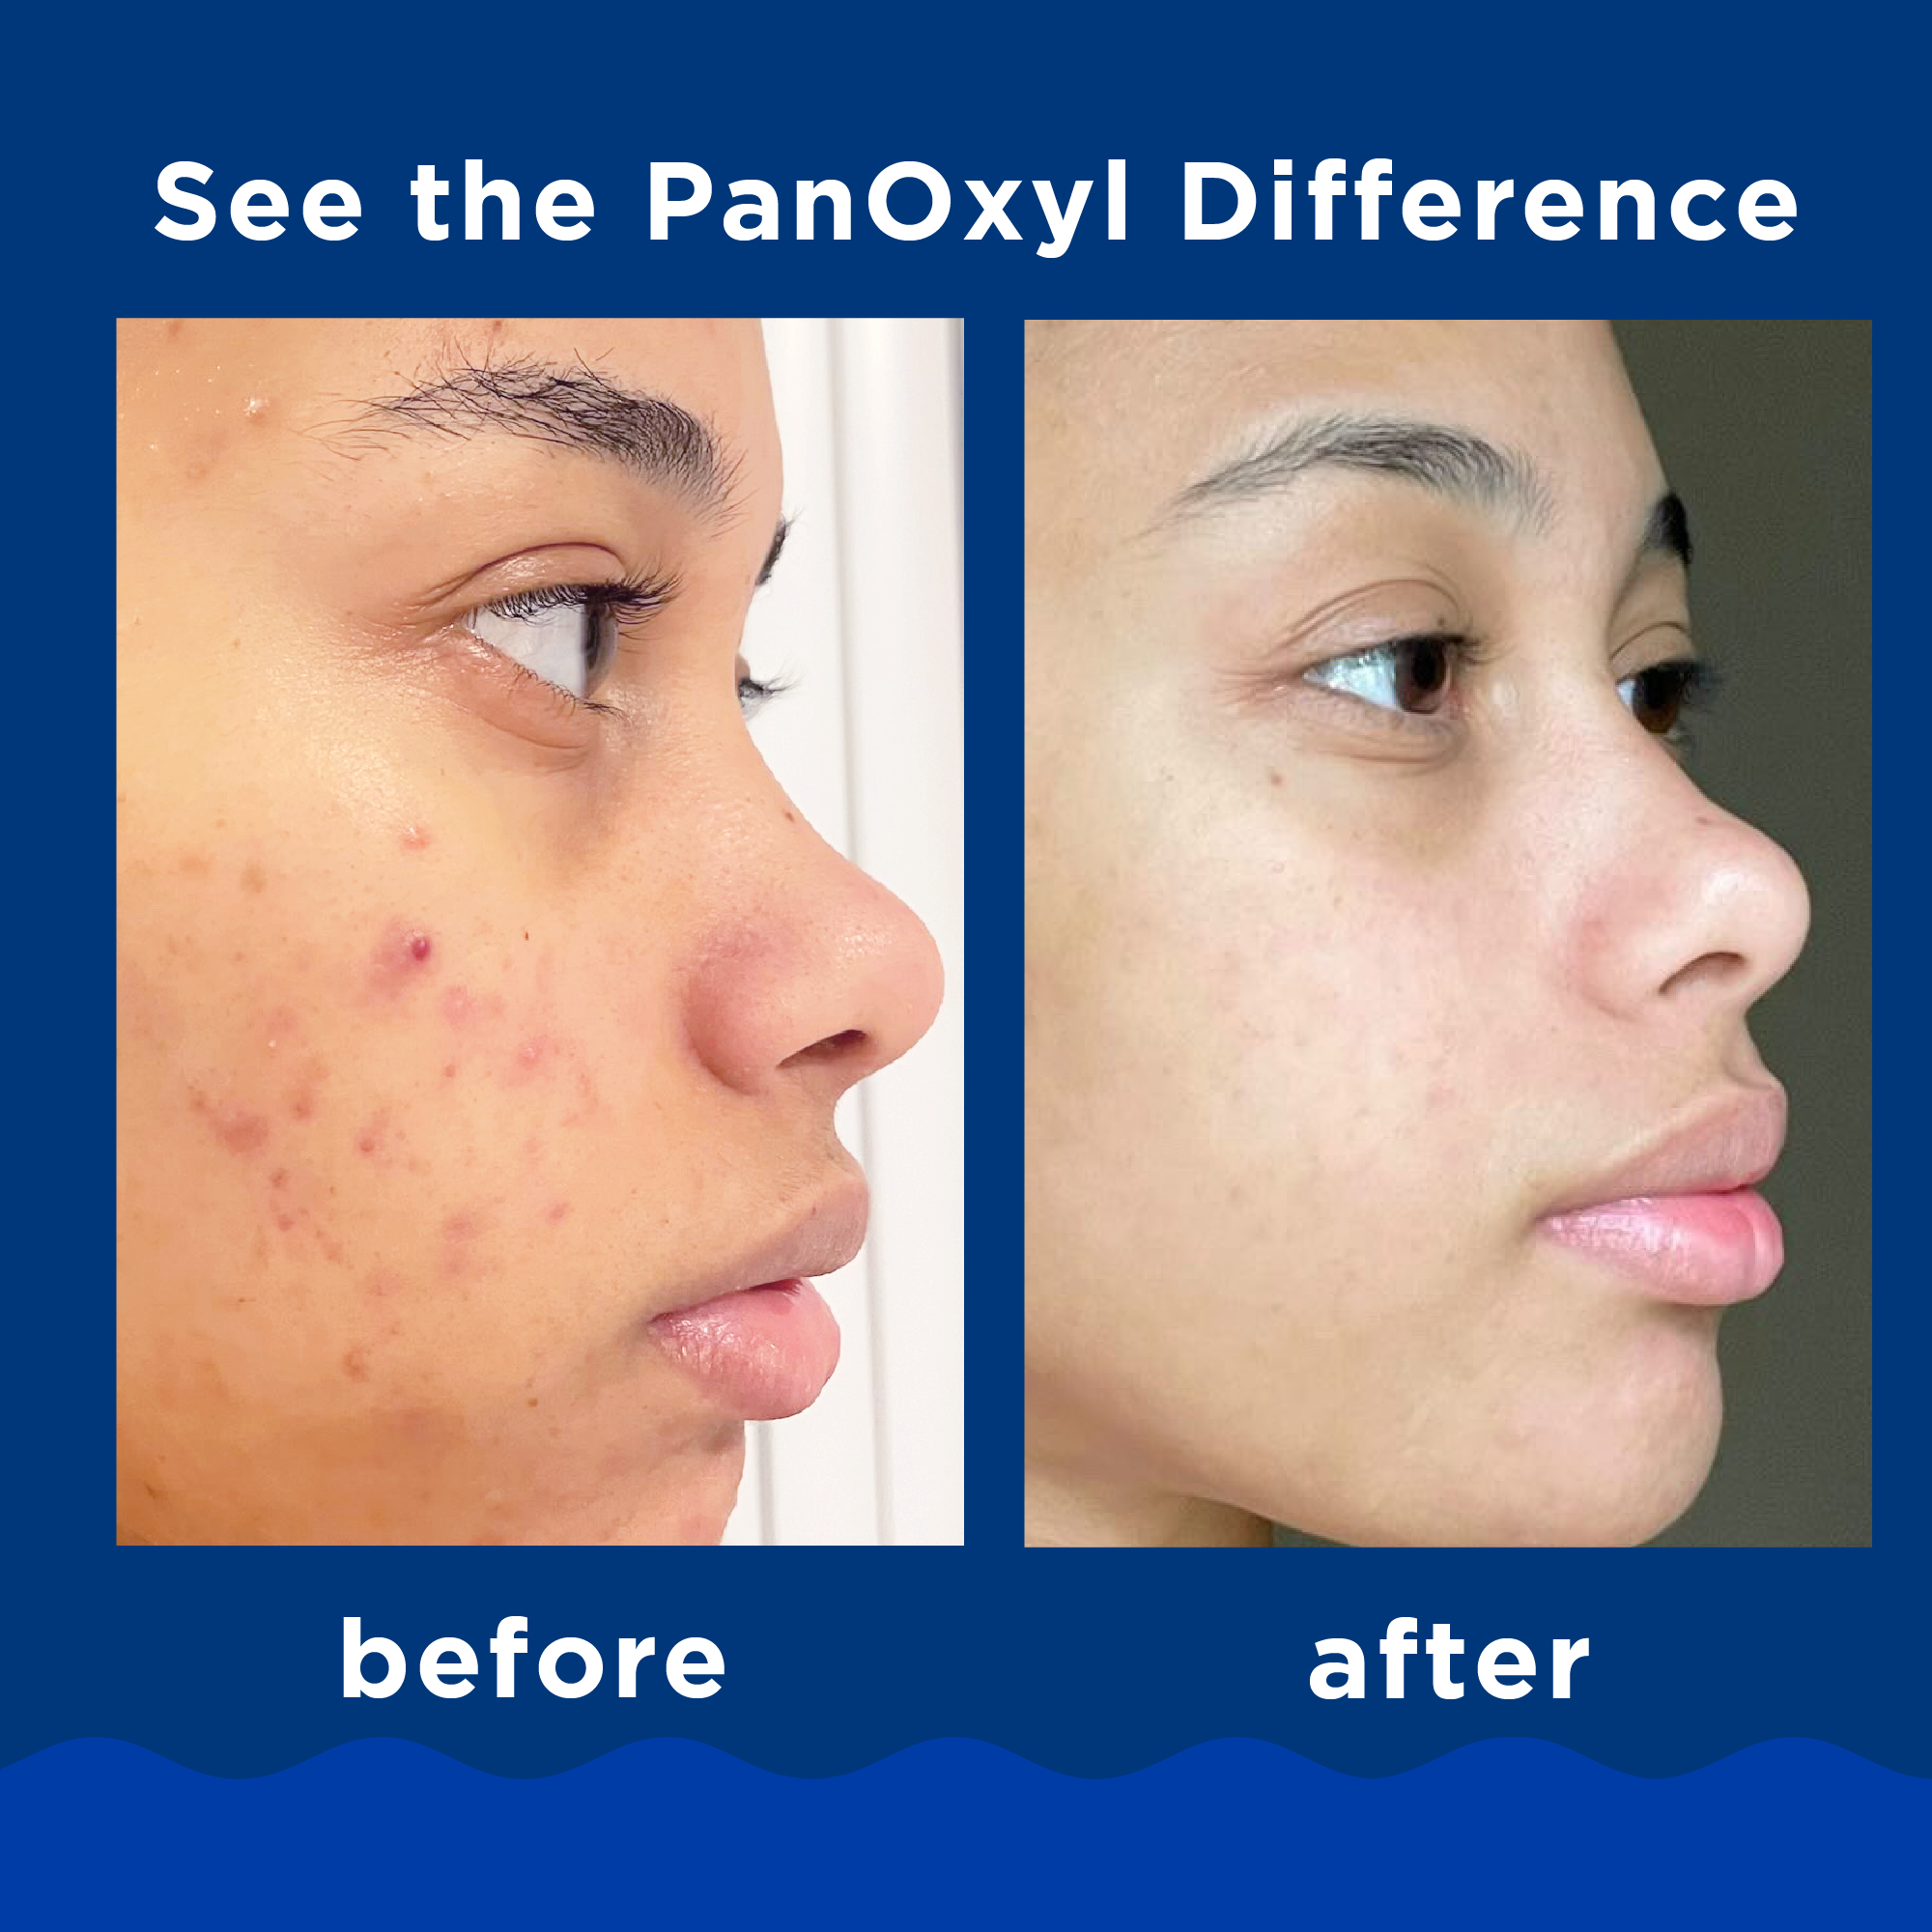 Before and after image of PanOxyl Acne Foaming Wash user, showing clearer skin in the after photo. See the PanOxyl difference.